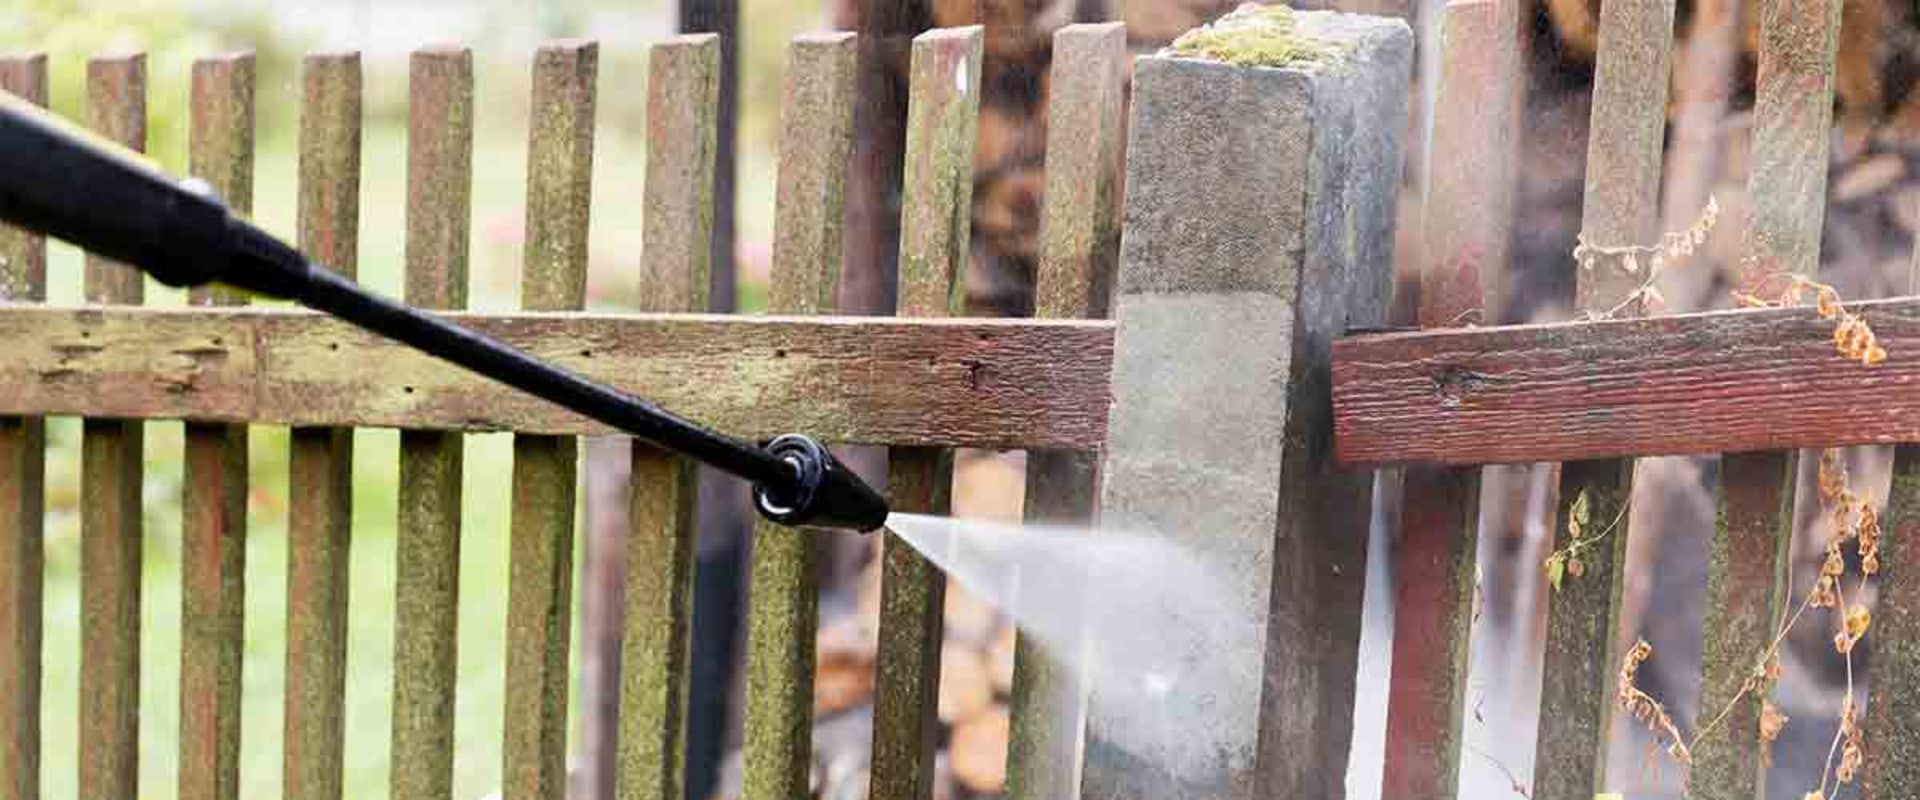 What pressure washer nozzle is best for fence?